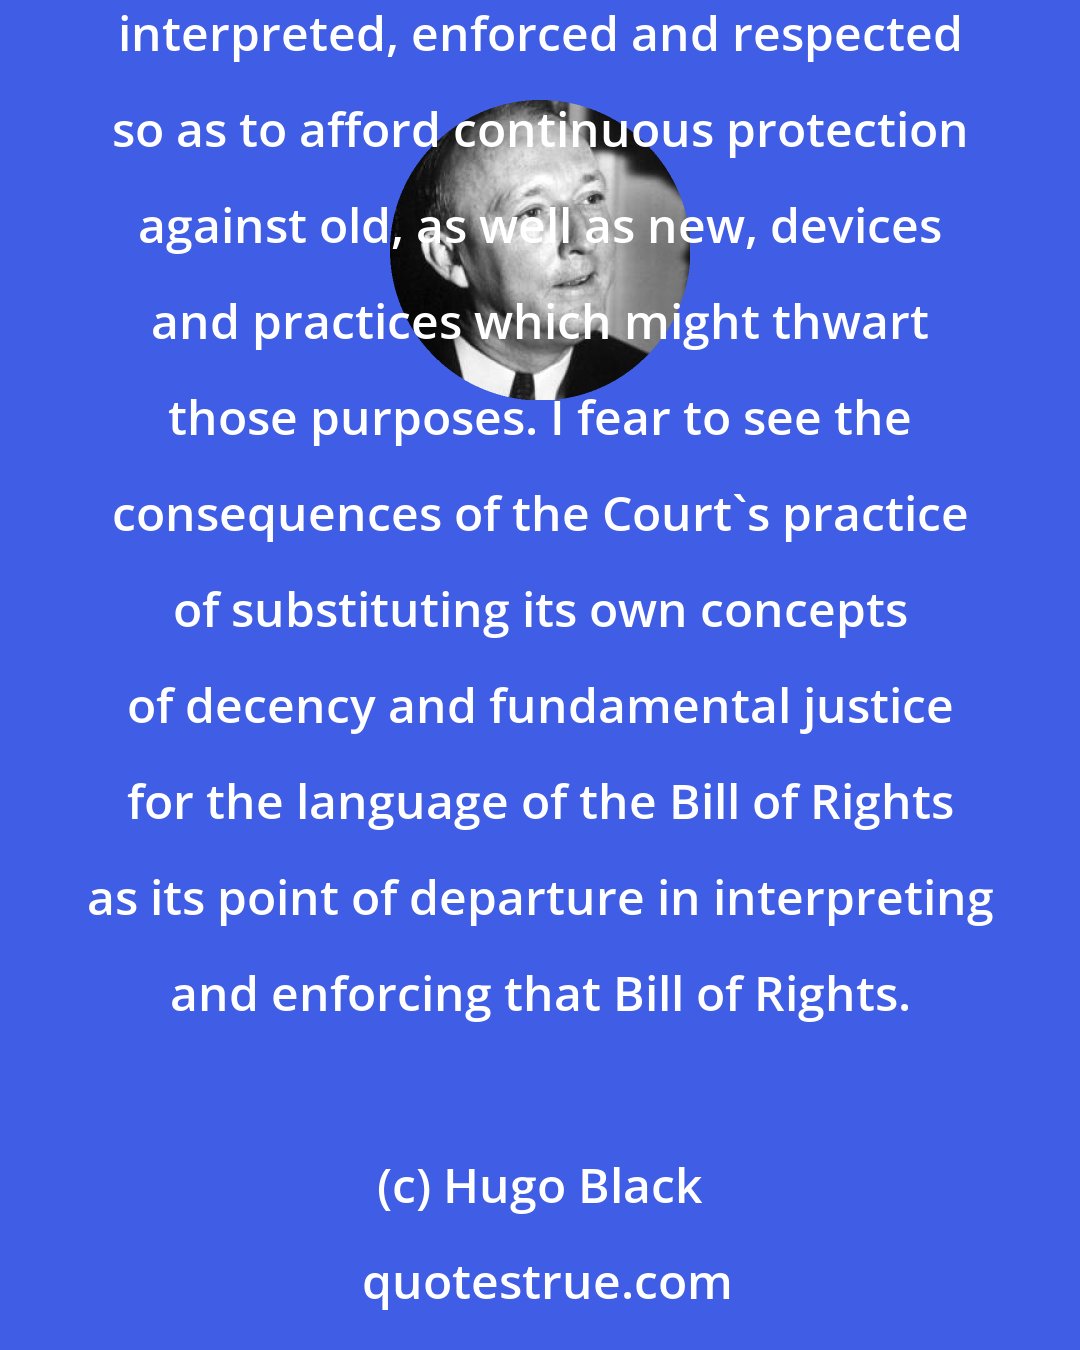 Hugo Black: In my judgment the people of no nation can lose their liberty so long as a Bill of Rights like ours survives and its basic purposes are conscientiously interpreted, enforced and respected so as to afford continuous protection against old, as well as new, devices and practices which might thwart those purposes. I fear to see the consequences of the Court's practice of substituting its own concepts of decency and fundamental justice for the language of the Bill of Rights as its point of departure in interpreting and enforcing that Bill of Rights.